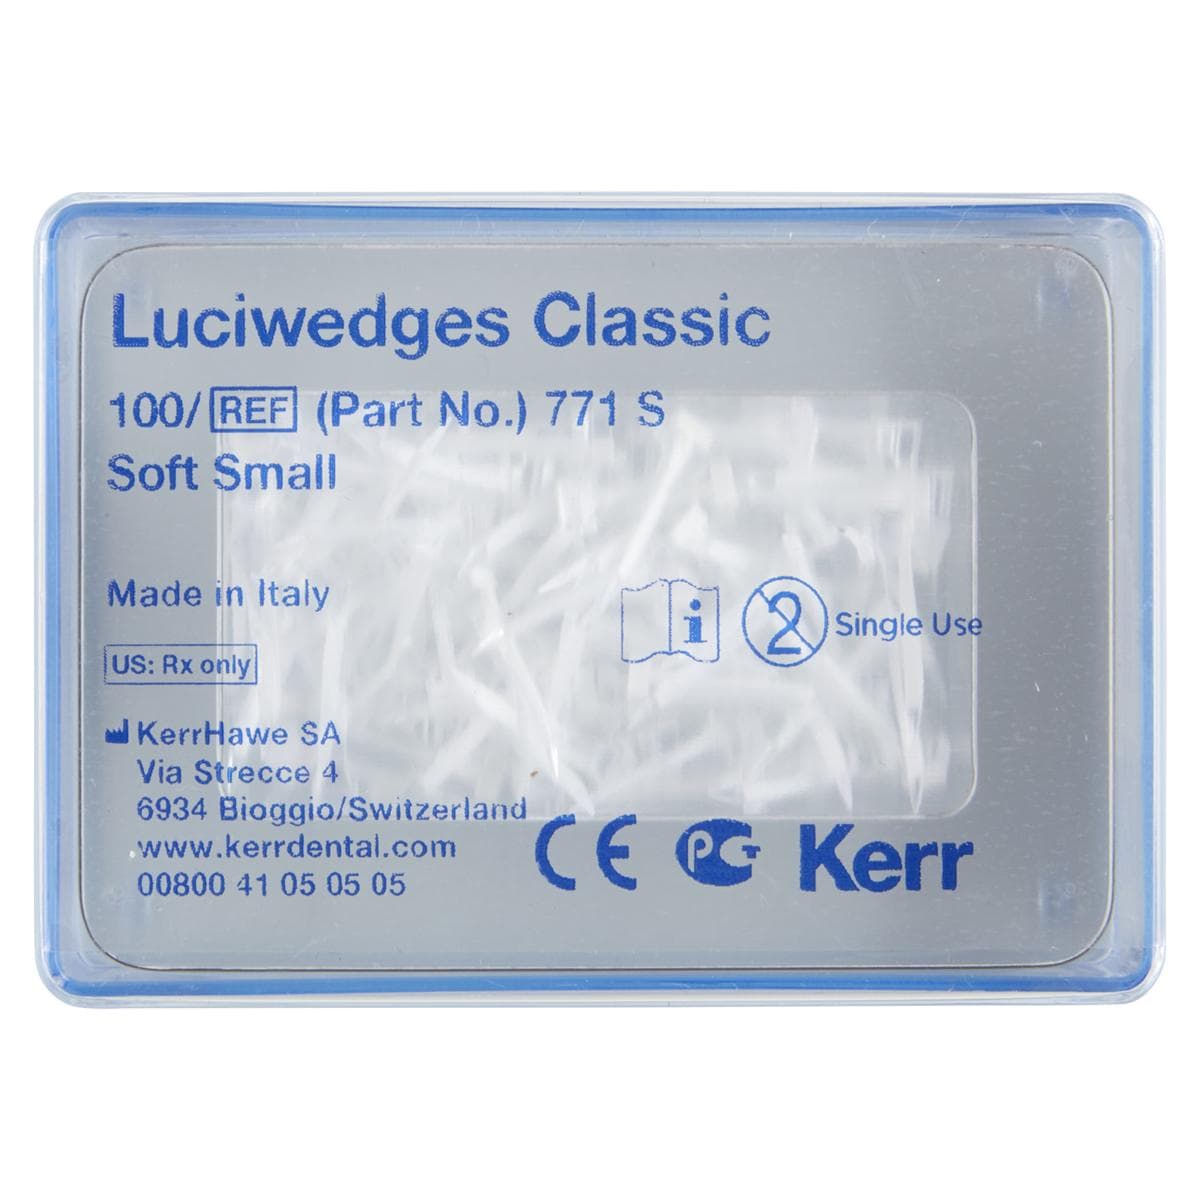 Luciwedge Soft - Nr. 771S soft small